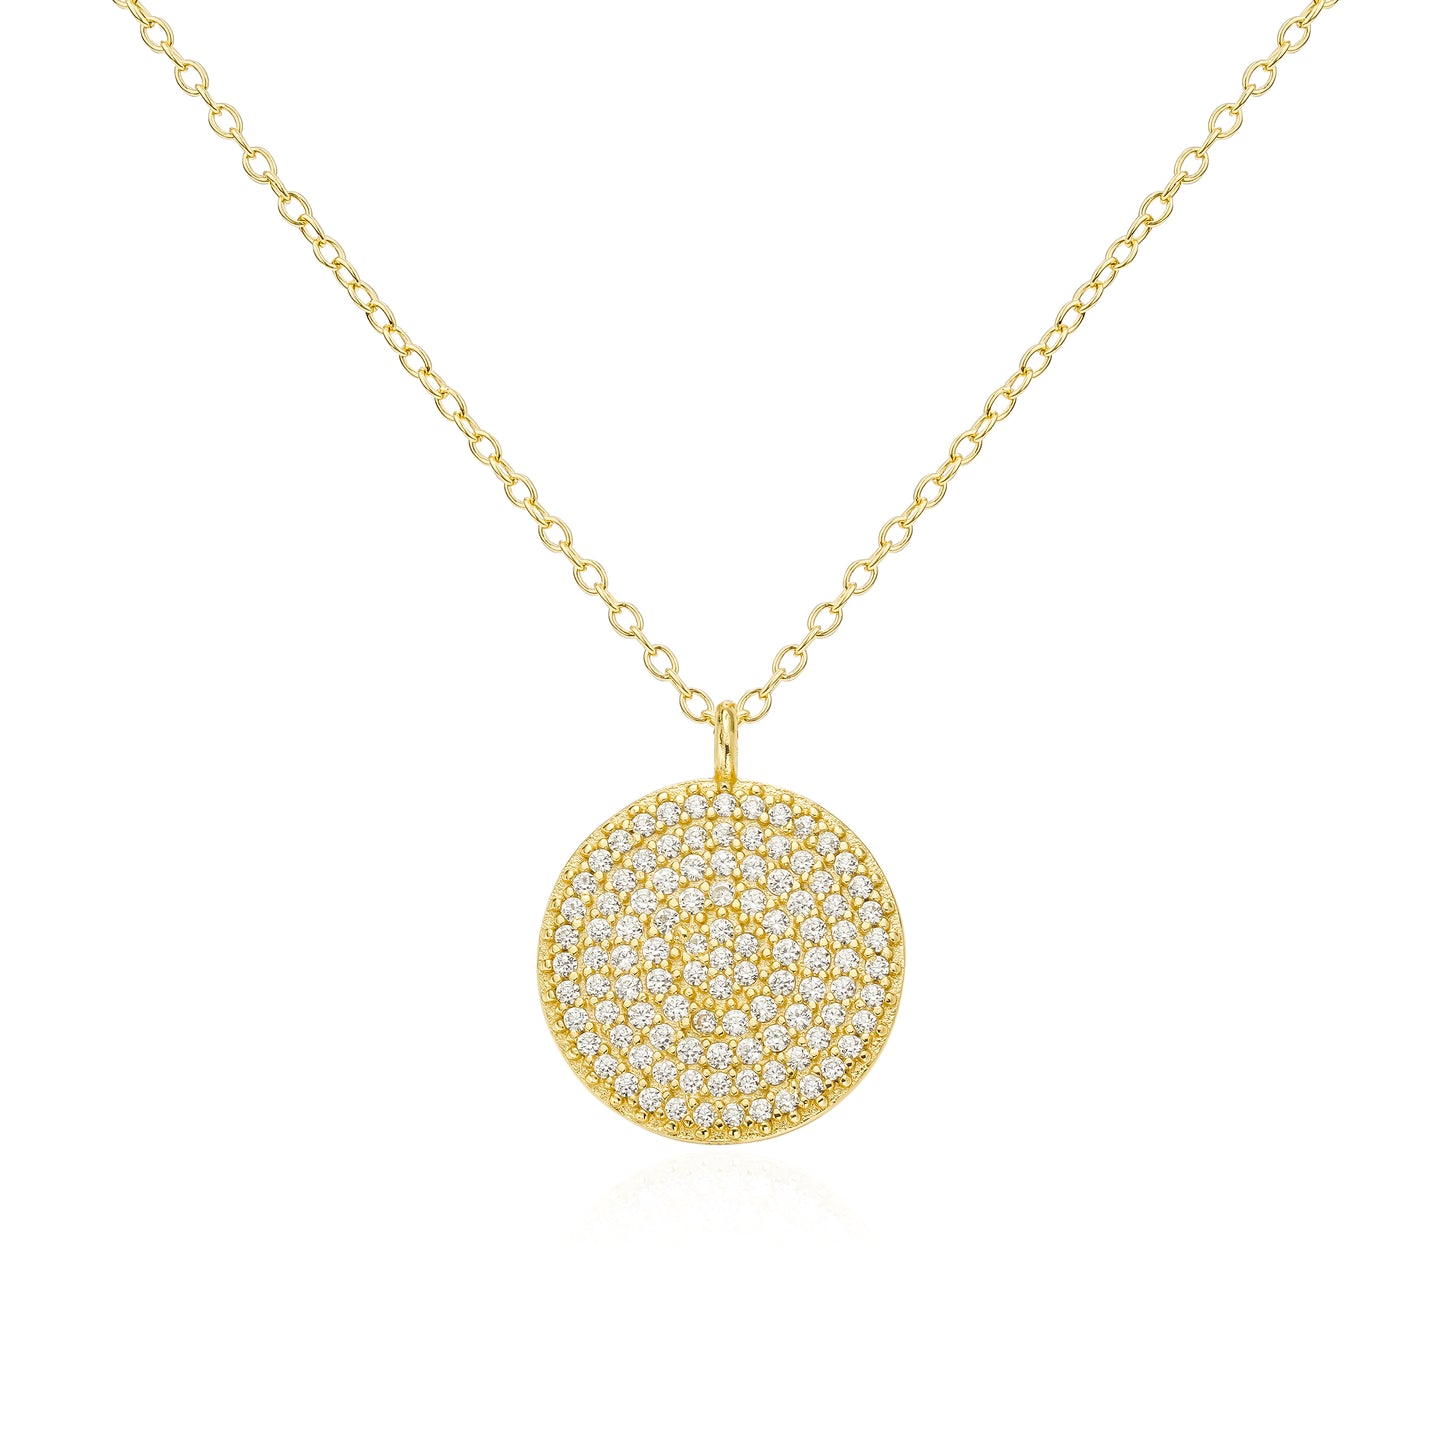 Sun Pendant - gold plated sterling silver - 18" ECO Chain Necklace